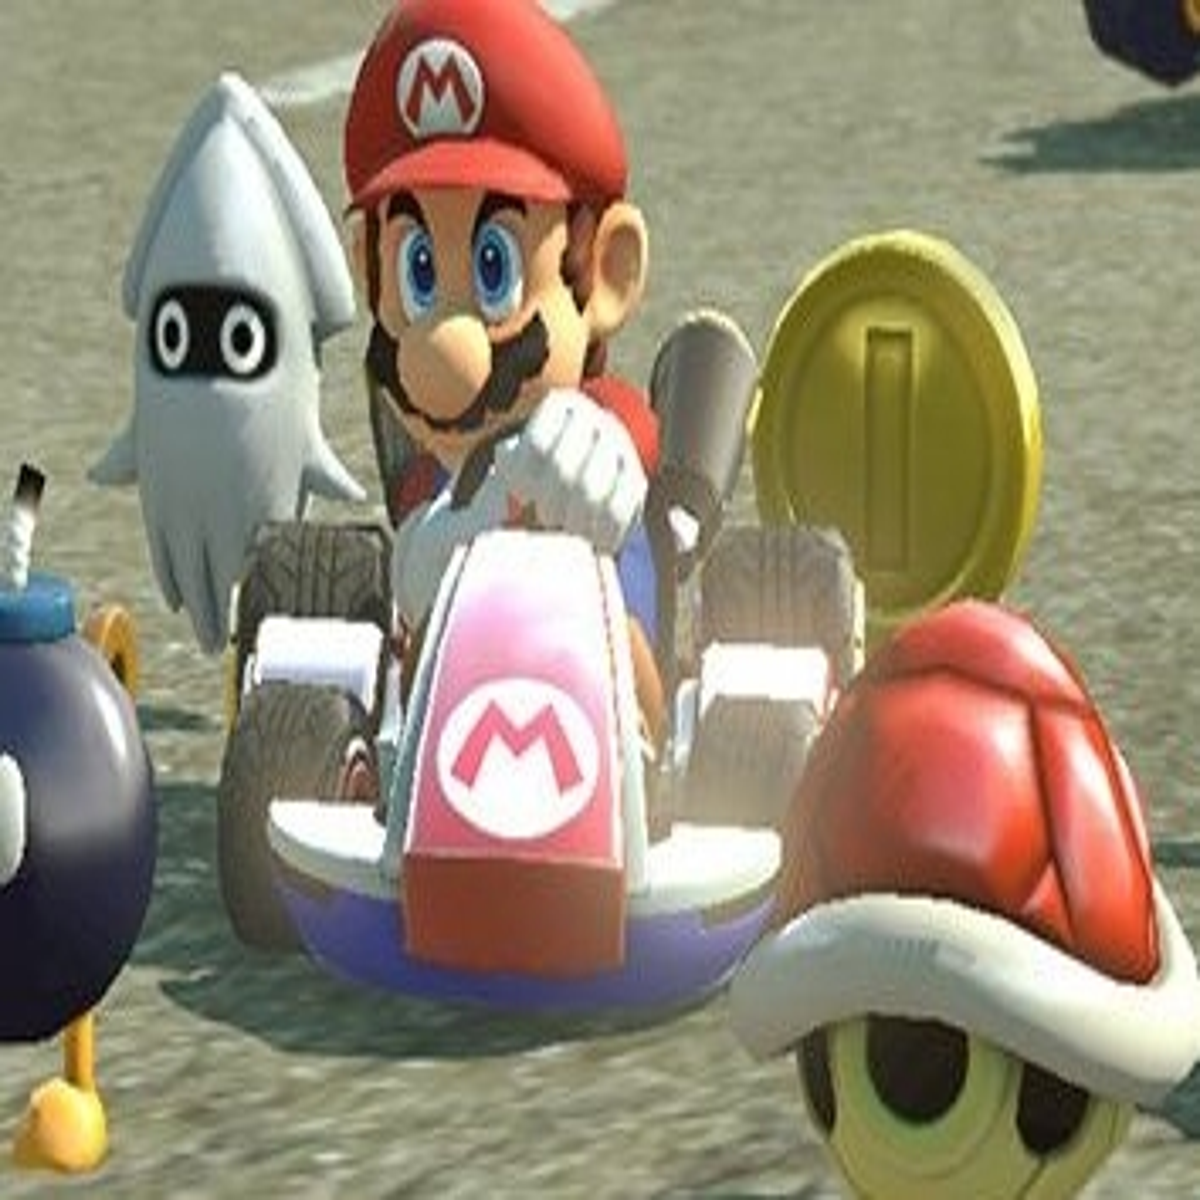 Mario Kart 8's new Booster Course Pass tracks betray their mobile